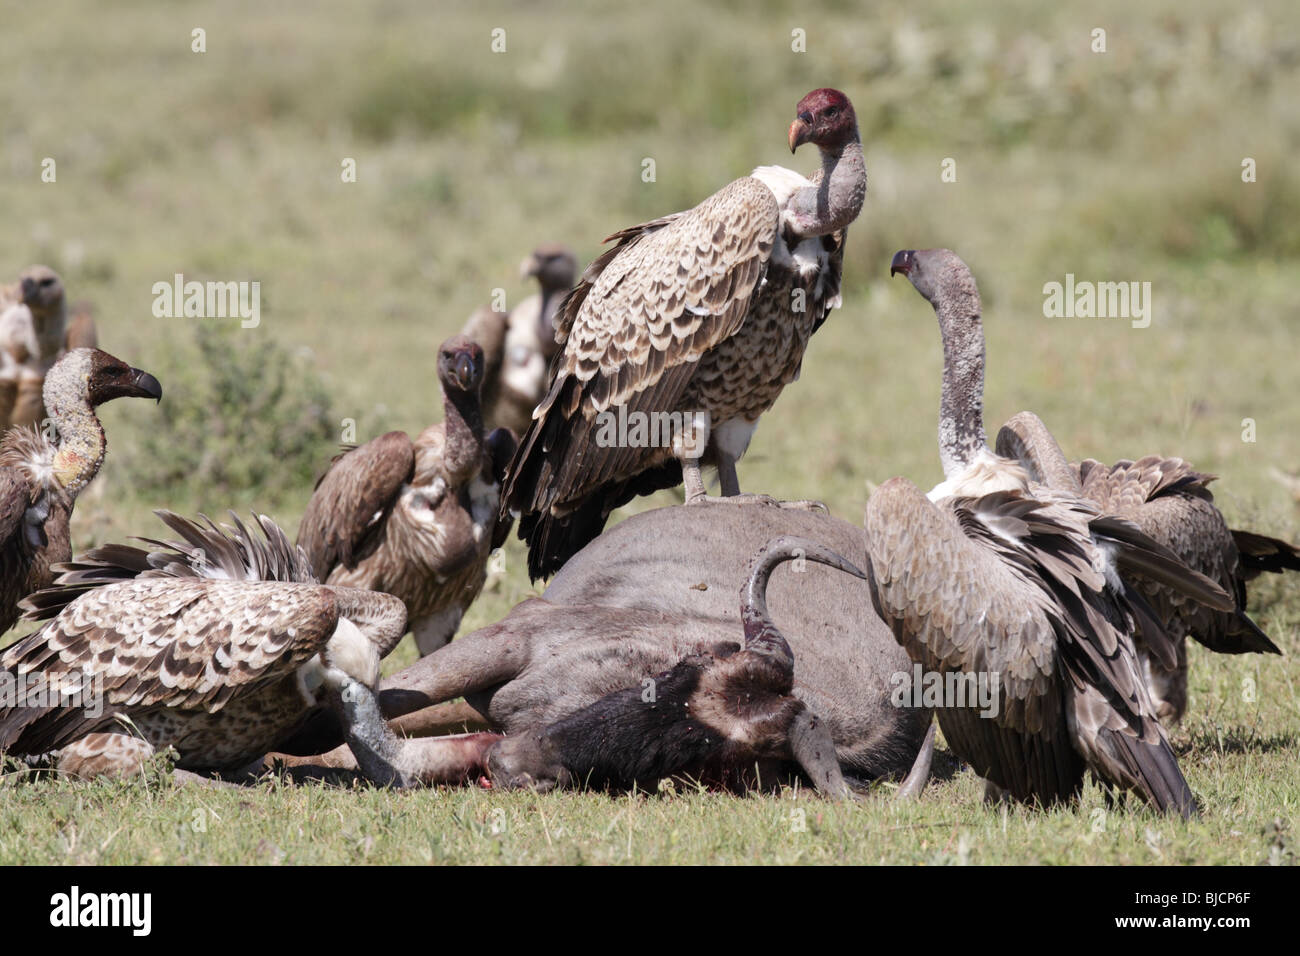 Vultures on a Wildebeest kill in Tanzania Stock Photo